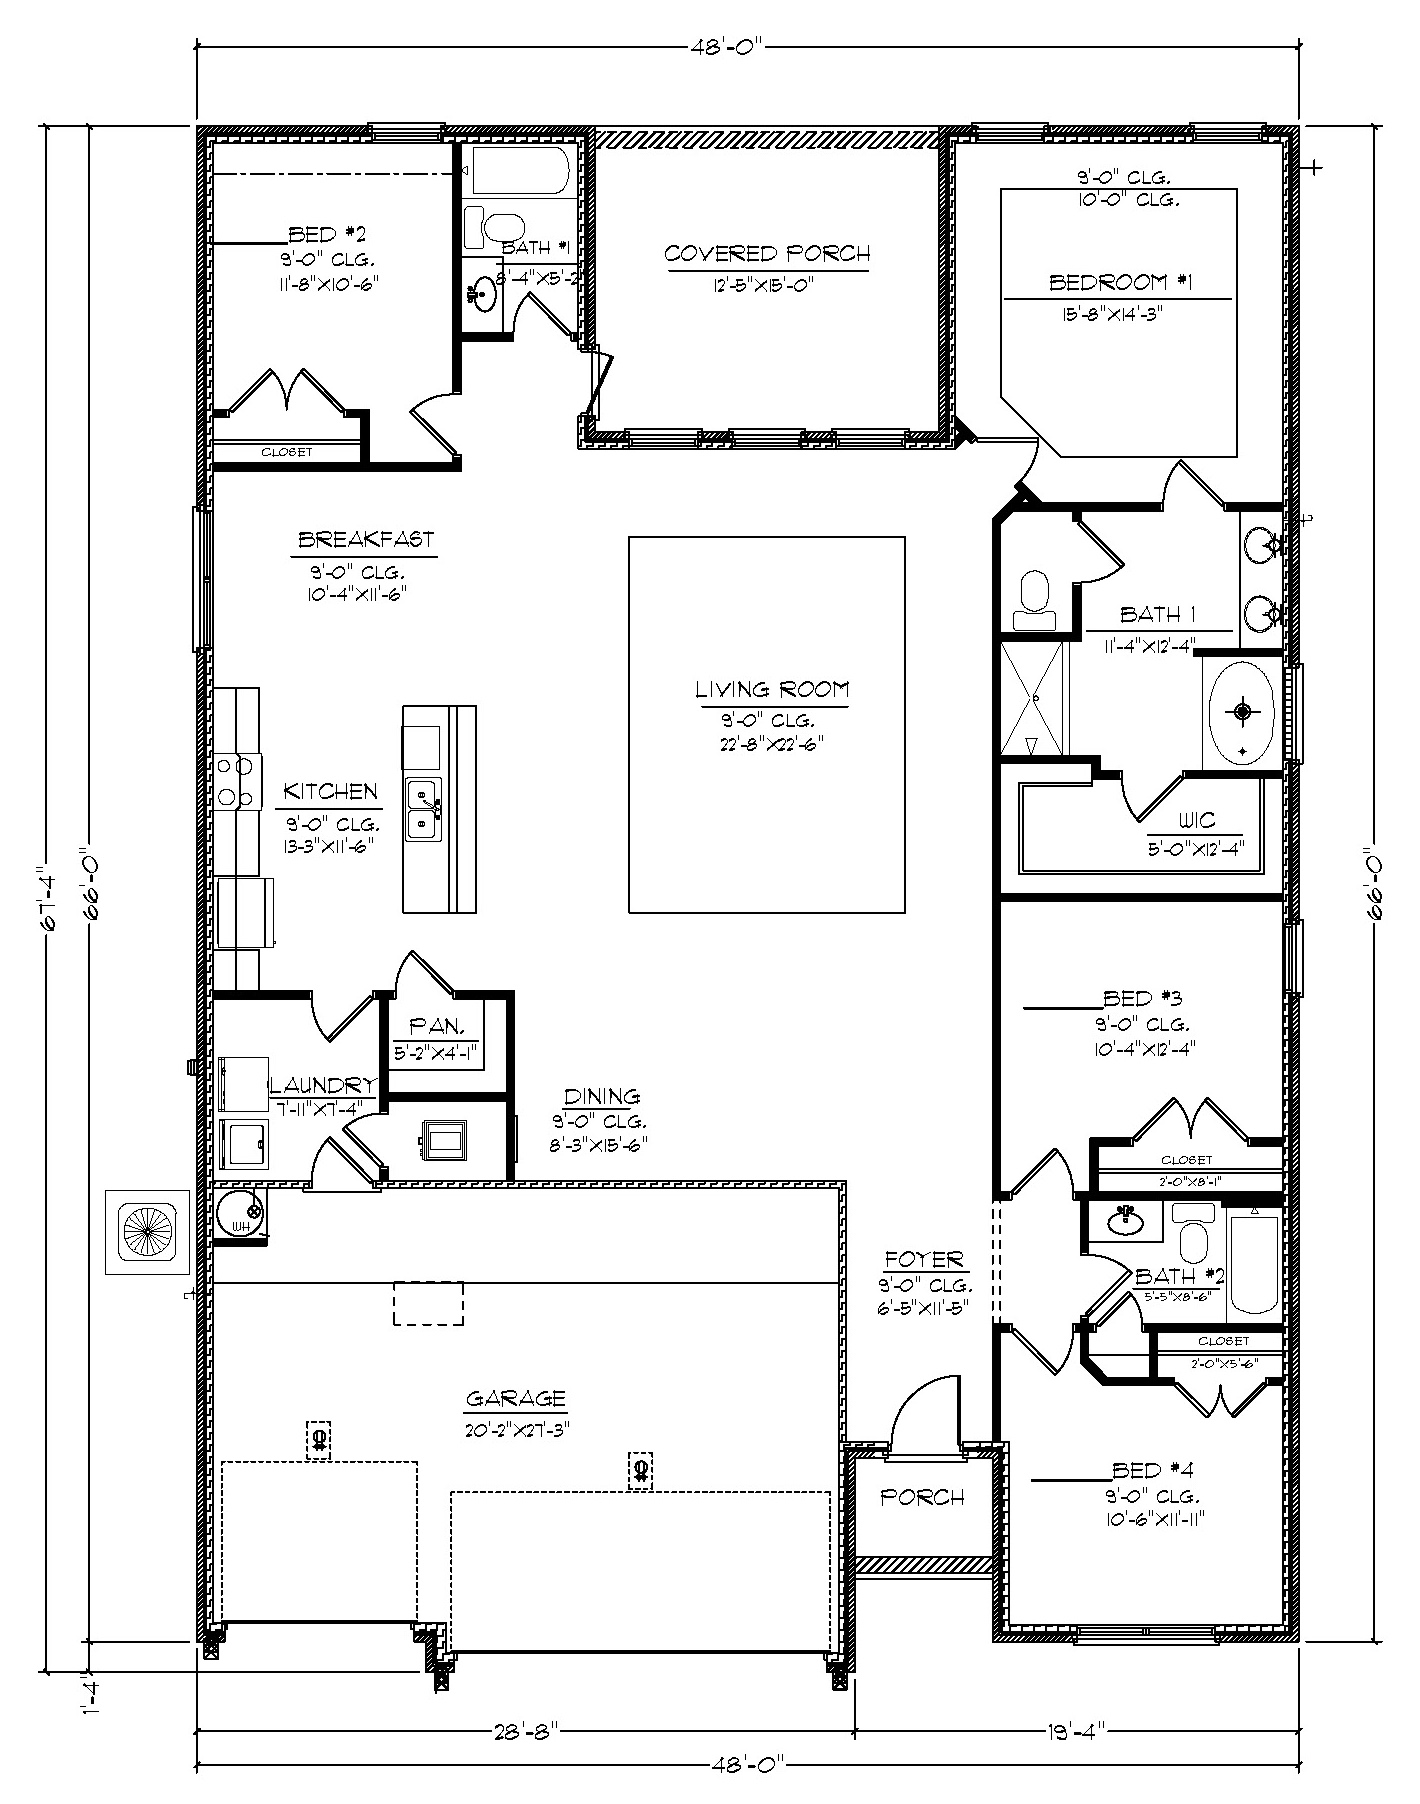 The Destin A, B and C front entry floor plan layout.